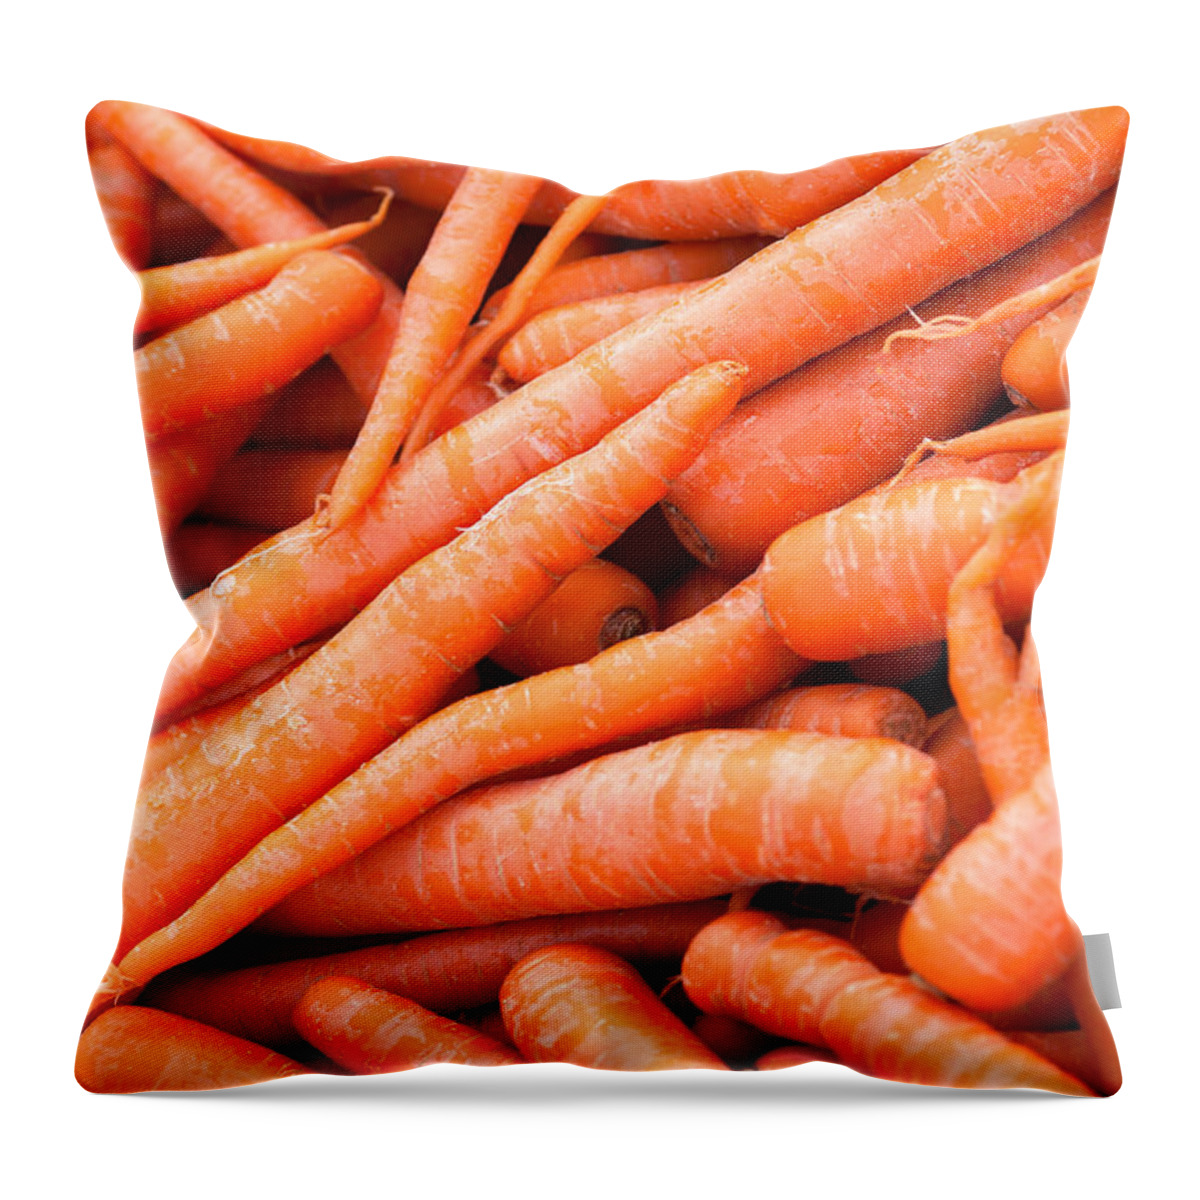 Carrot Throw Pillow featuring the photograph Bunch of Carrots by Todd Klassy